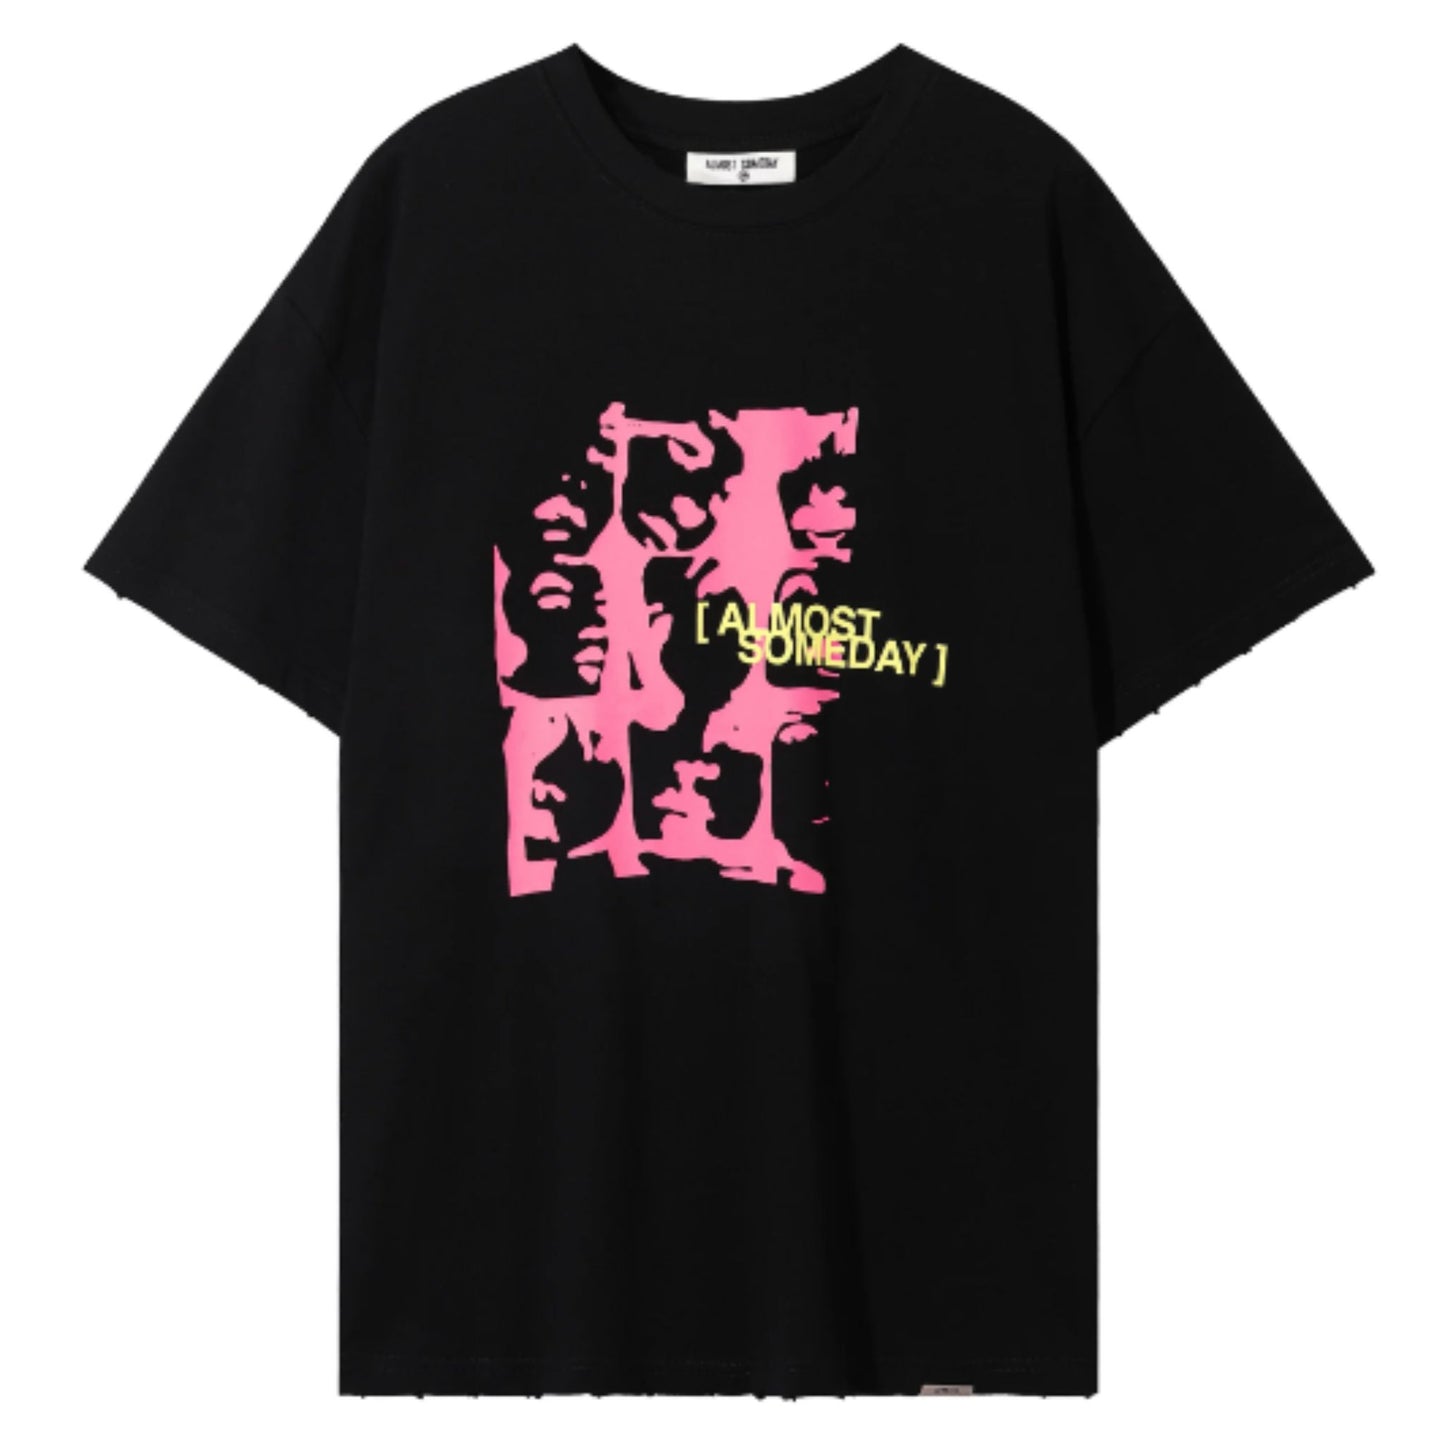 ALMOST SOMEDAY SACRED TEE